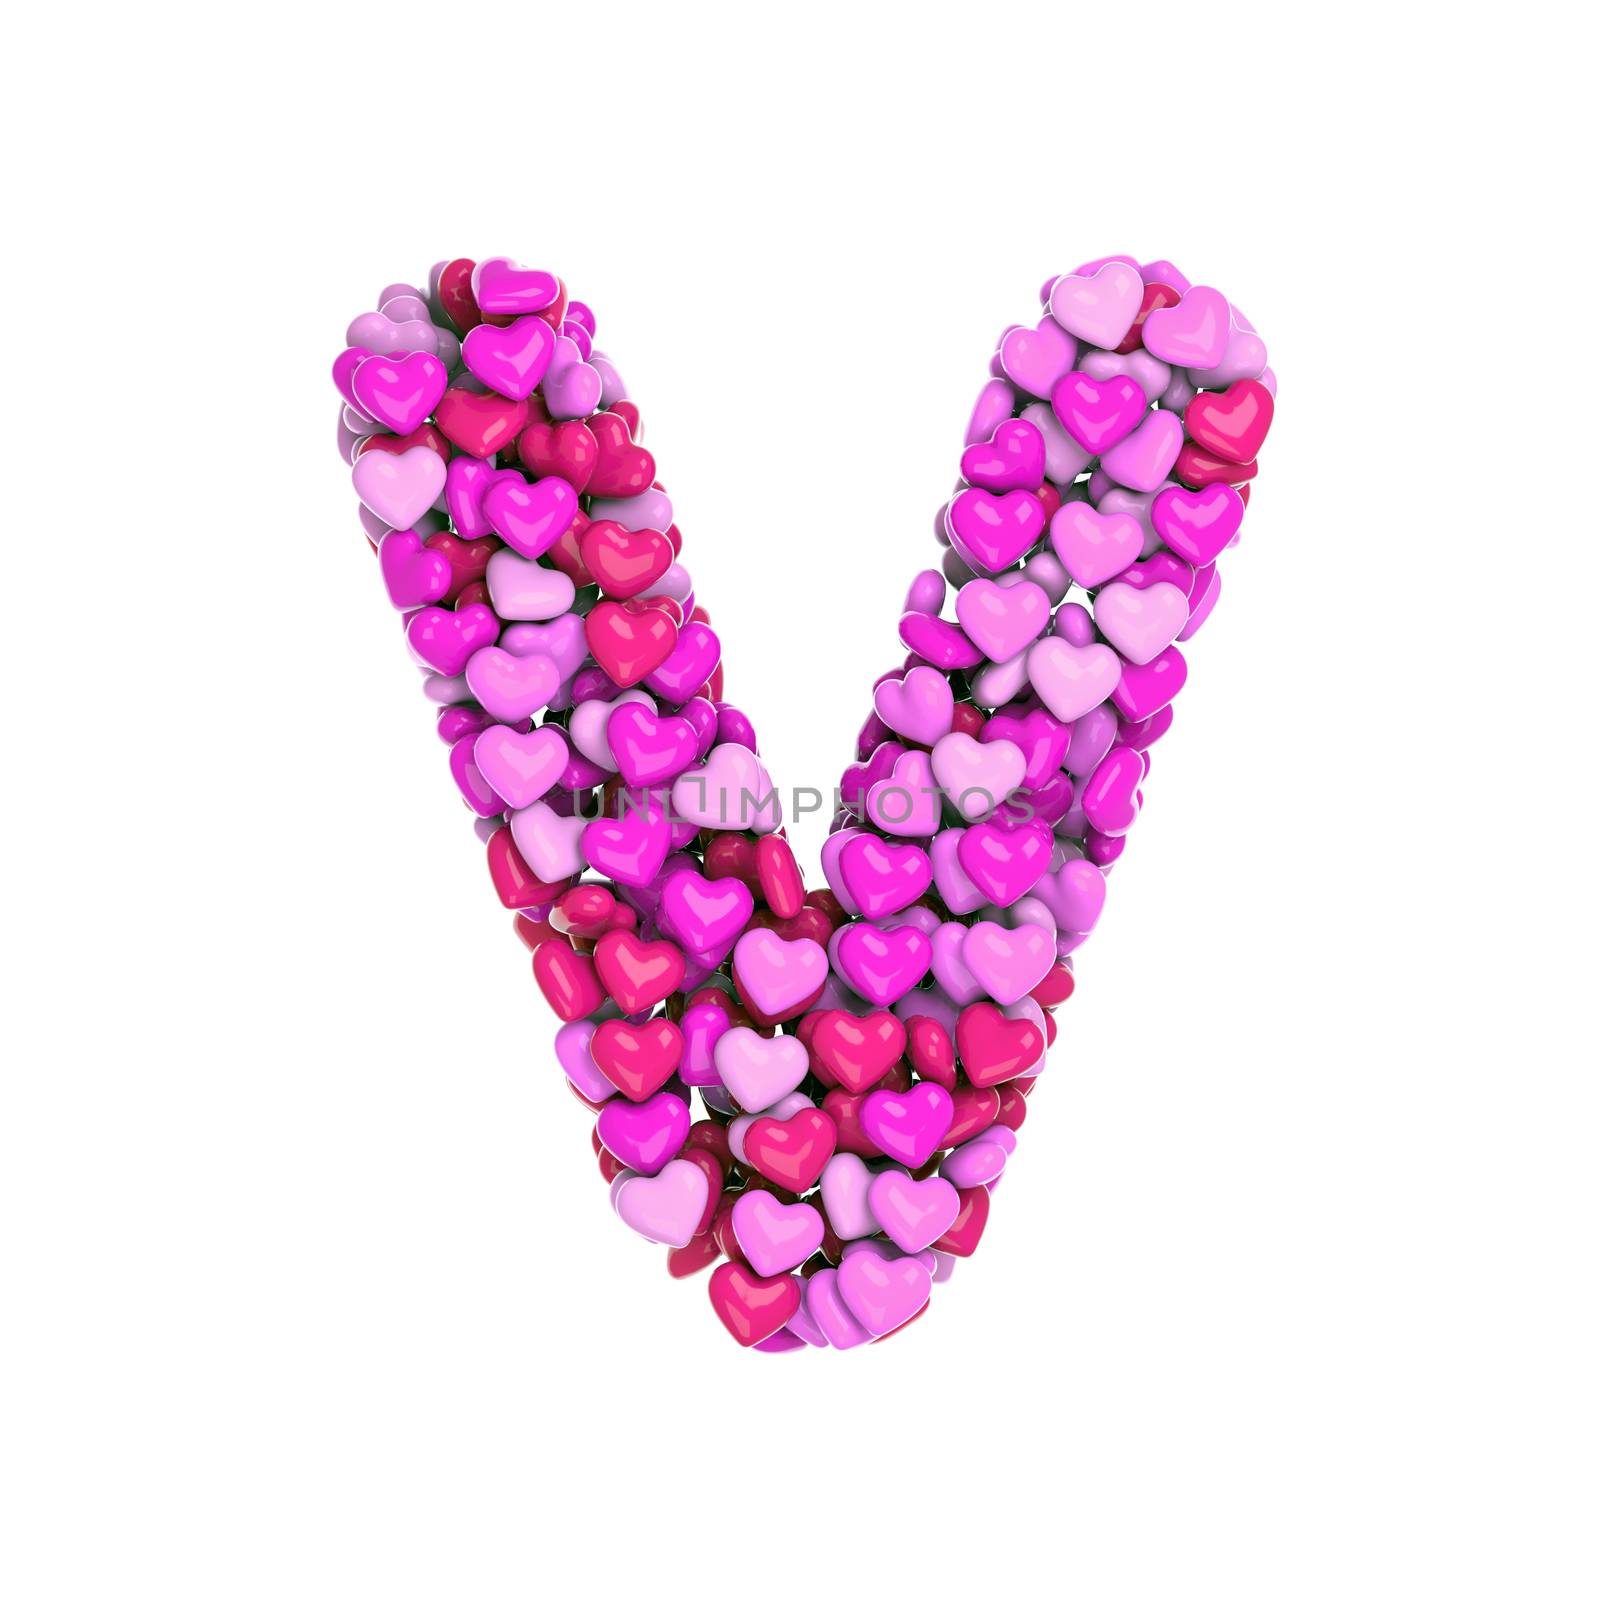 Valentine letter V - Capital 3d pink hearts font - Love, passion or wedding concept by chrisroll